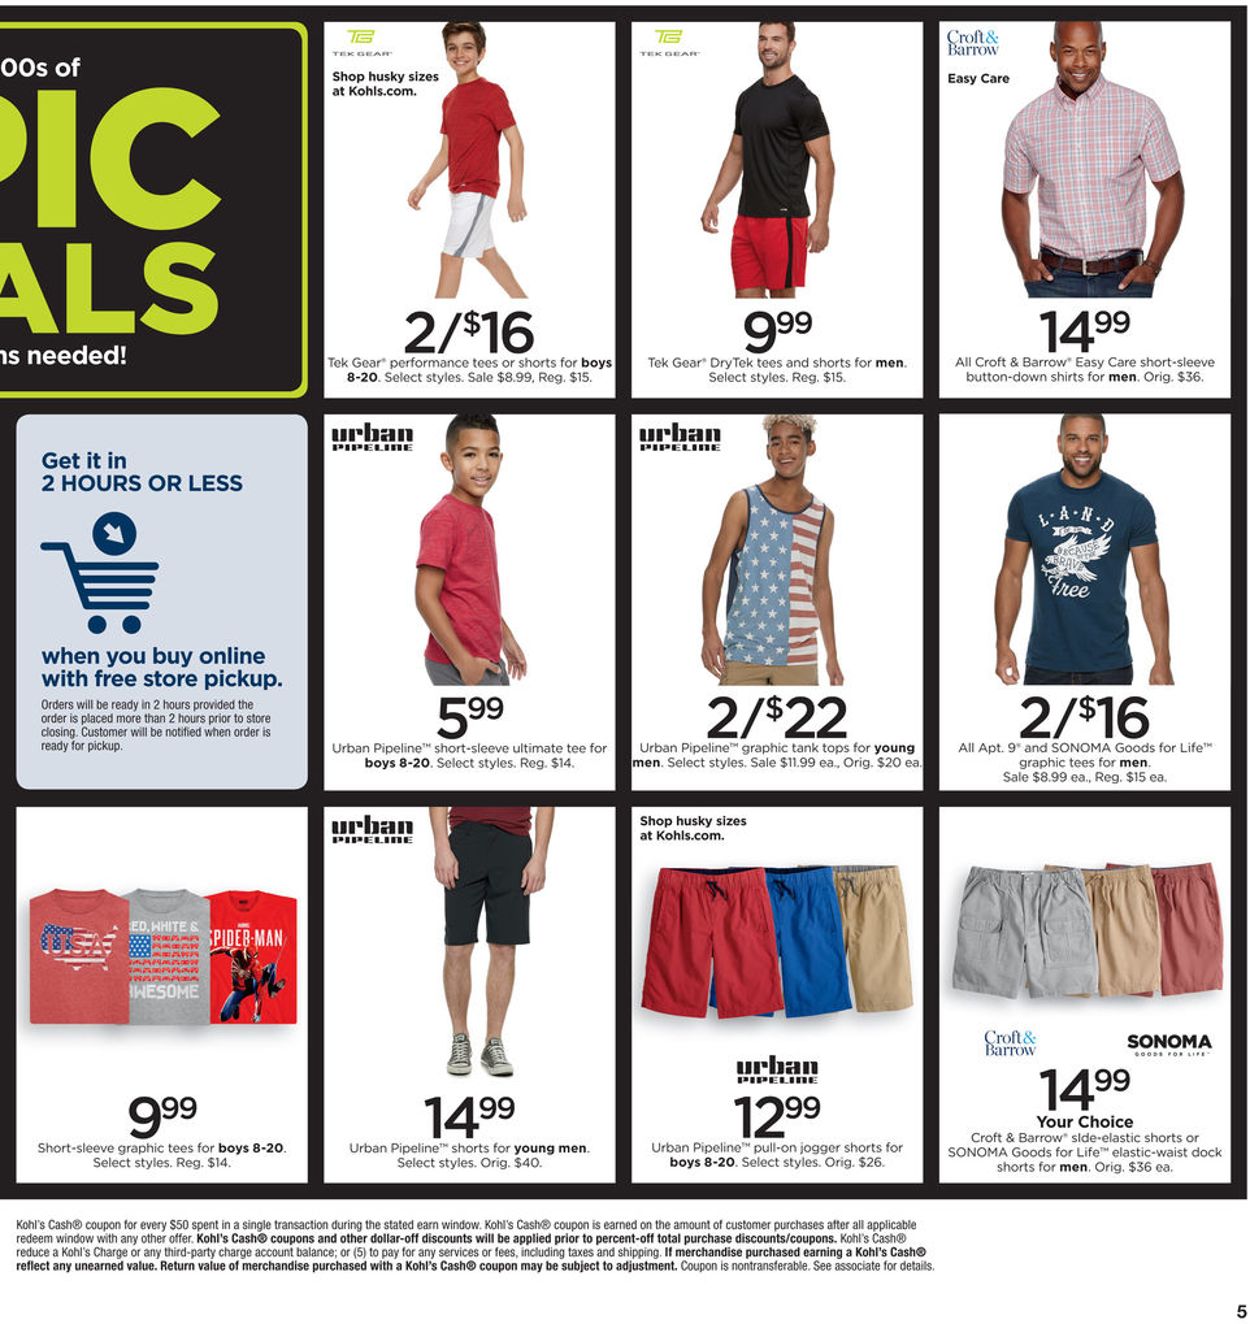 Kohl's Current weekly ad 06/26 - 06/30/2019 [5] - frequent-ads.com